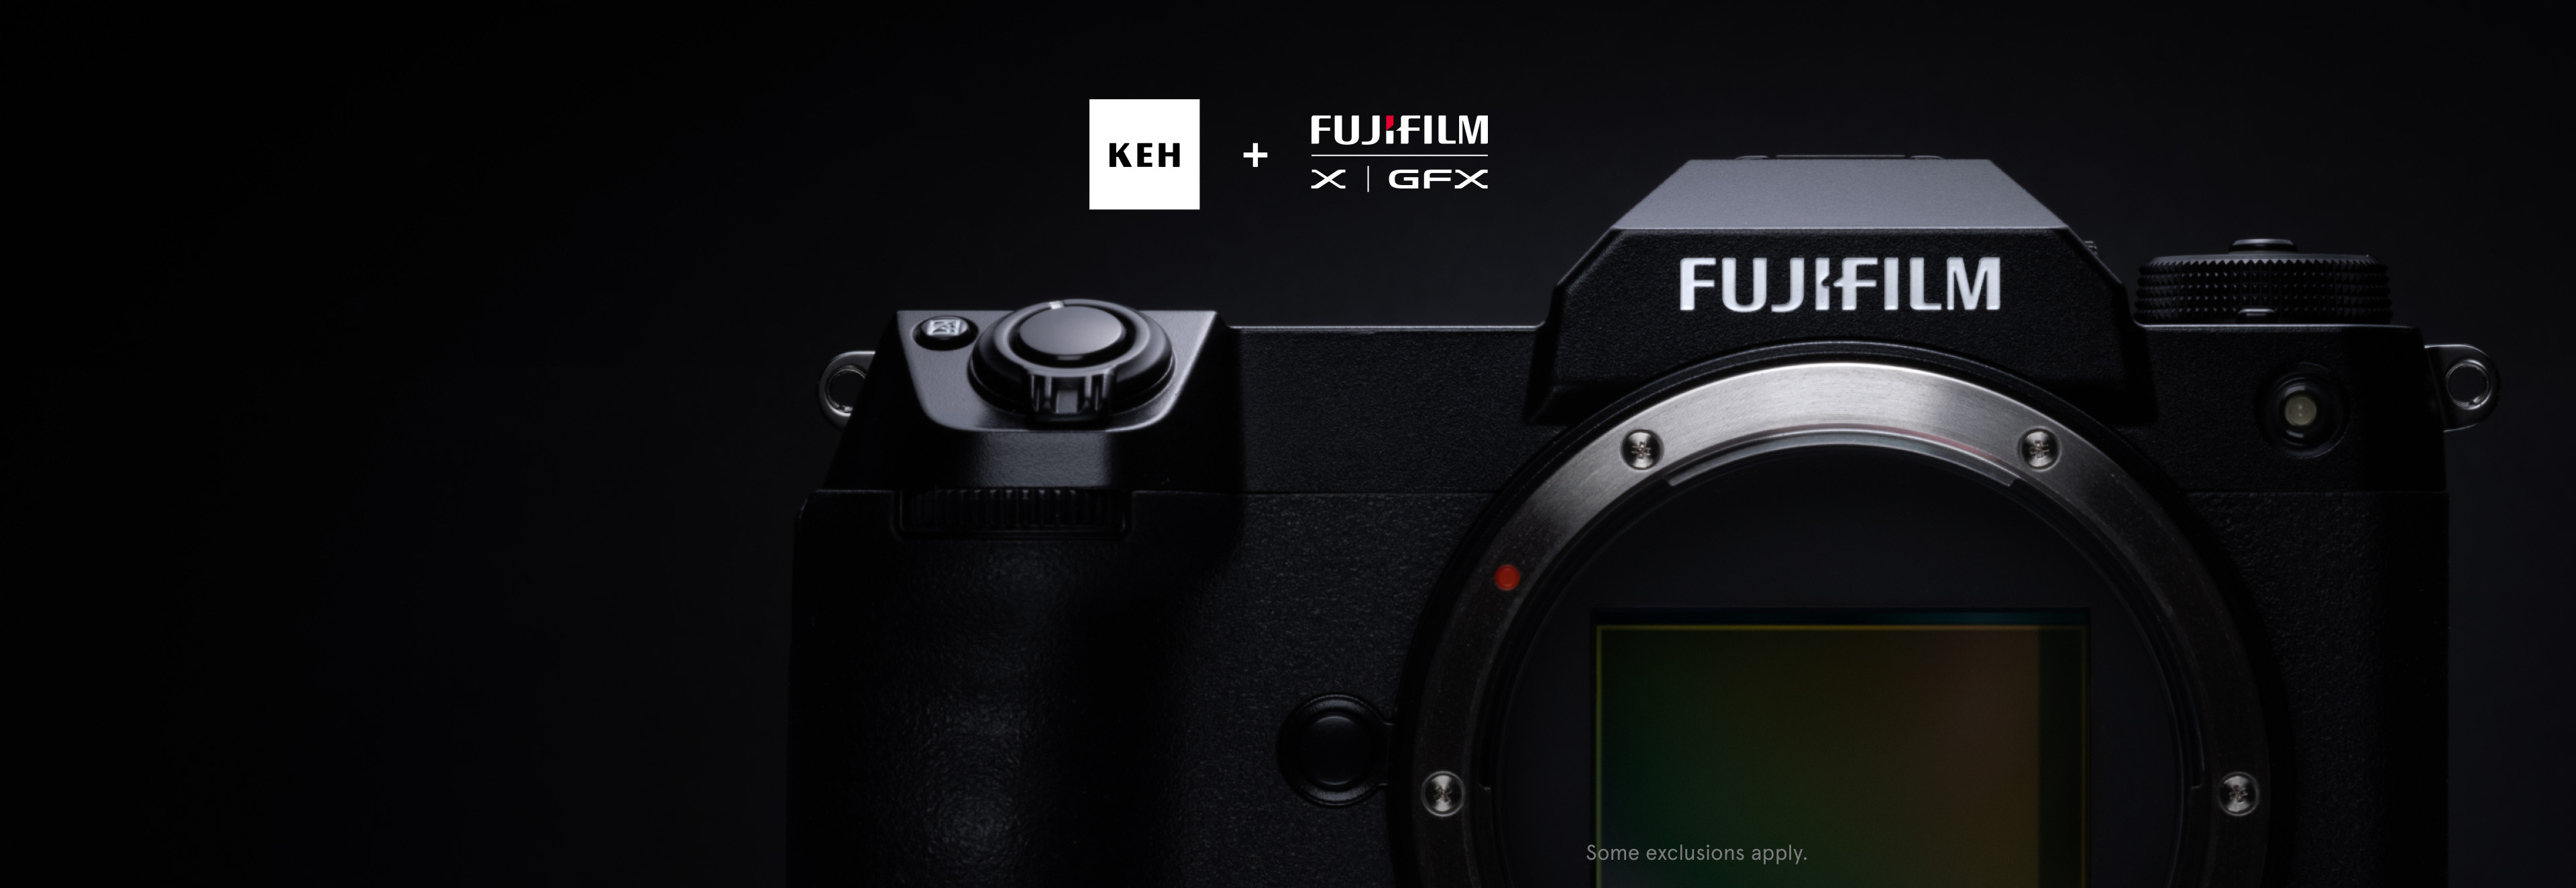 Used Cameras, Lenses & Gear For Sale | Buy & Sell at KEH Camera